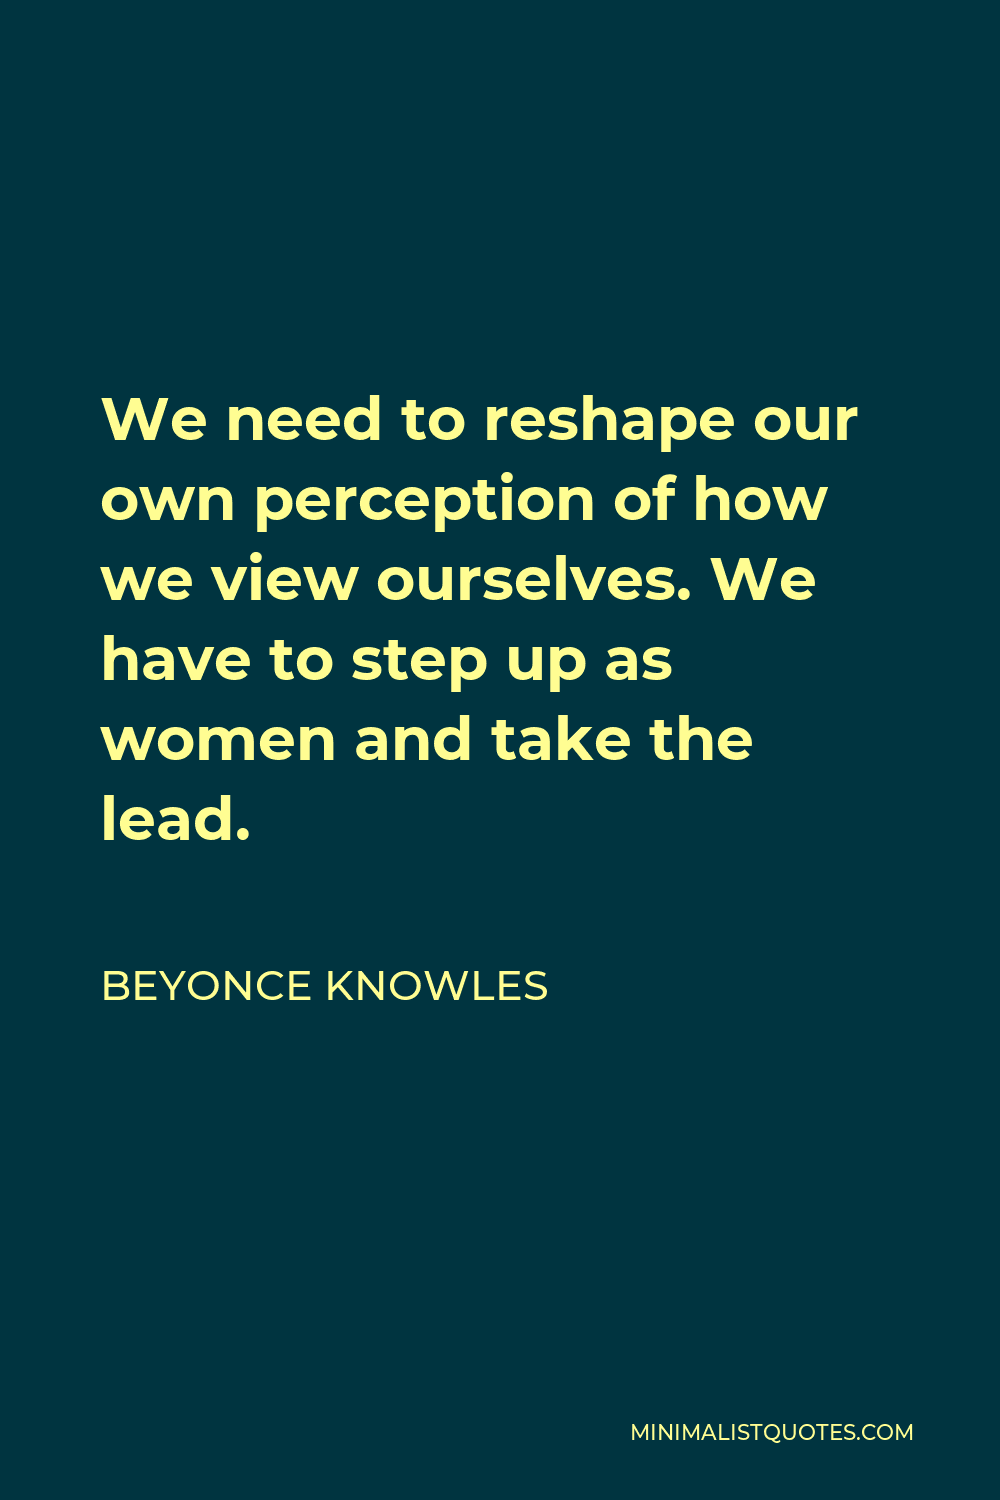 Beyonce Knowles Quote - We need to reshape our own perception of how we view ourselves. We have to step up as women and take the lead.